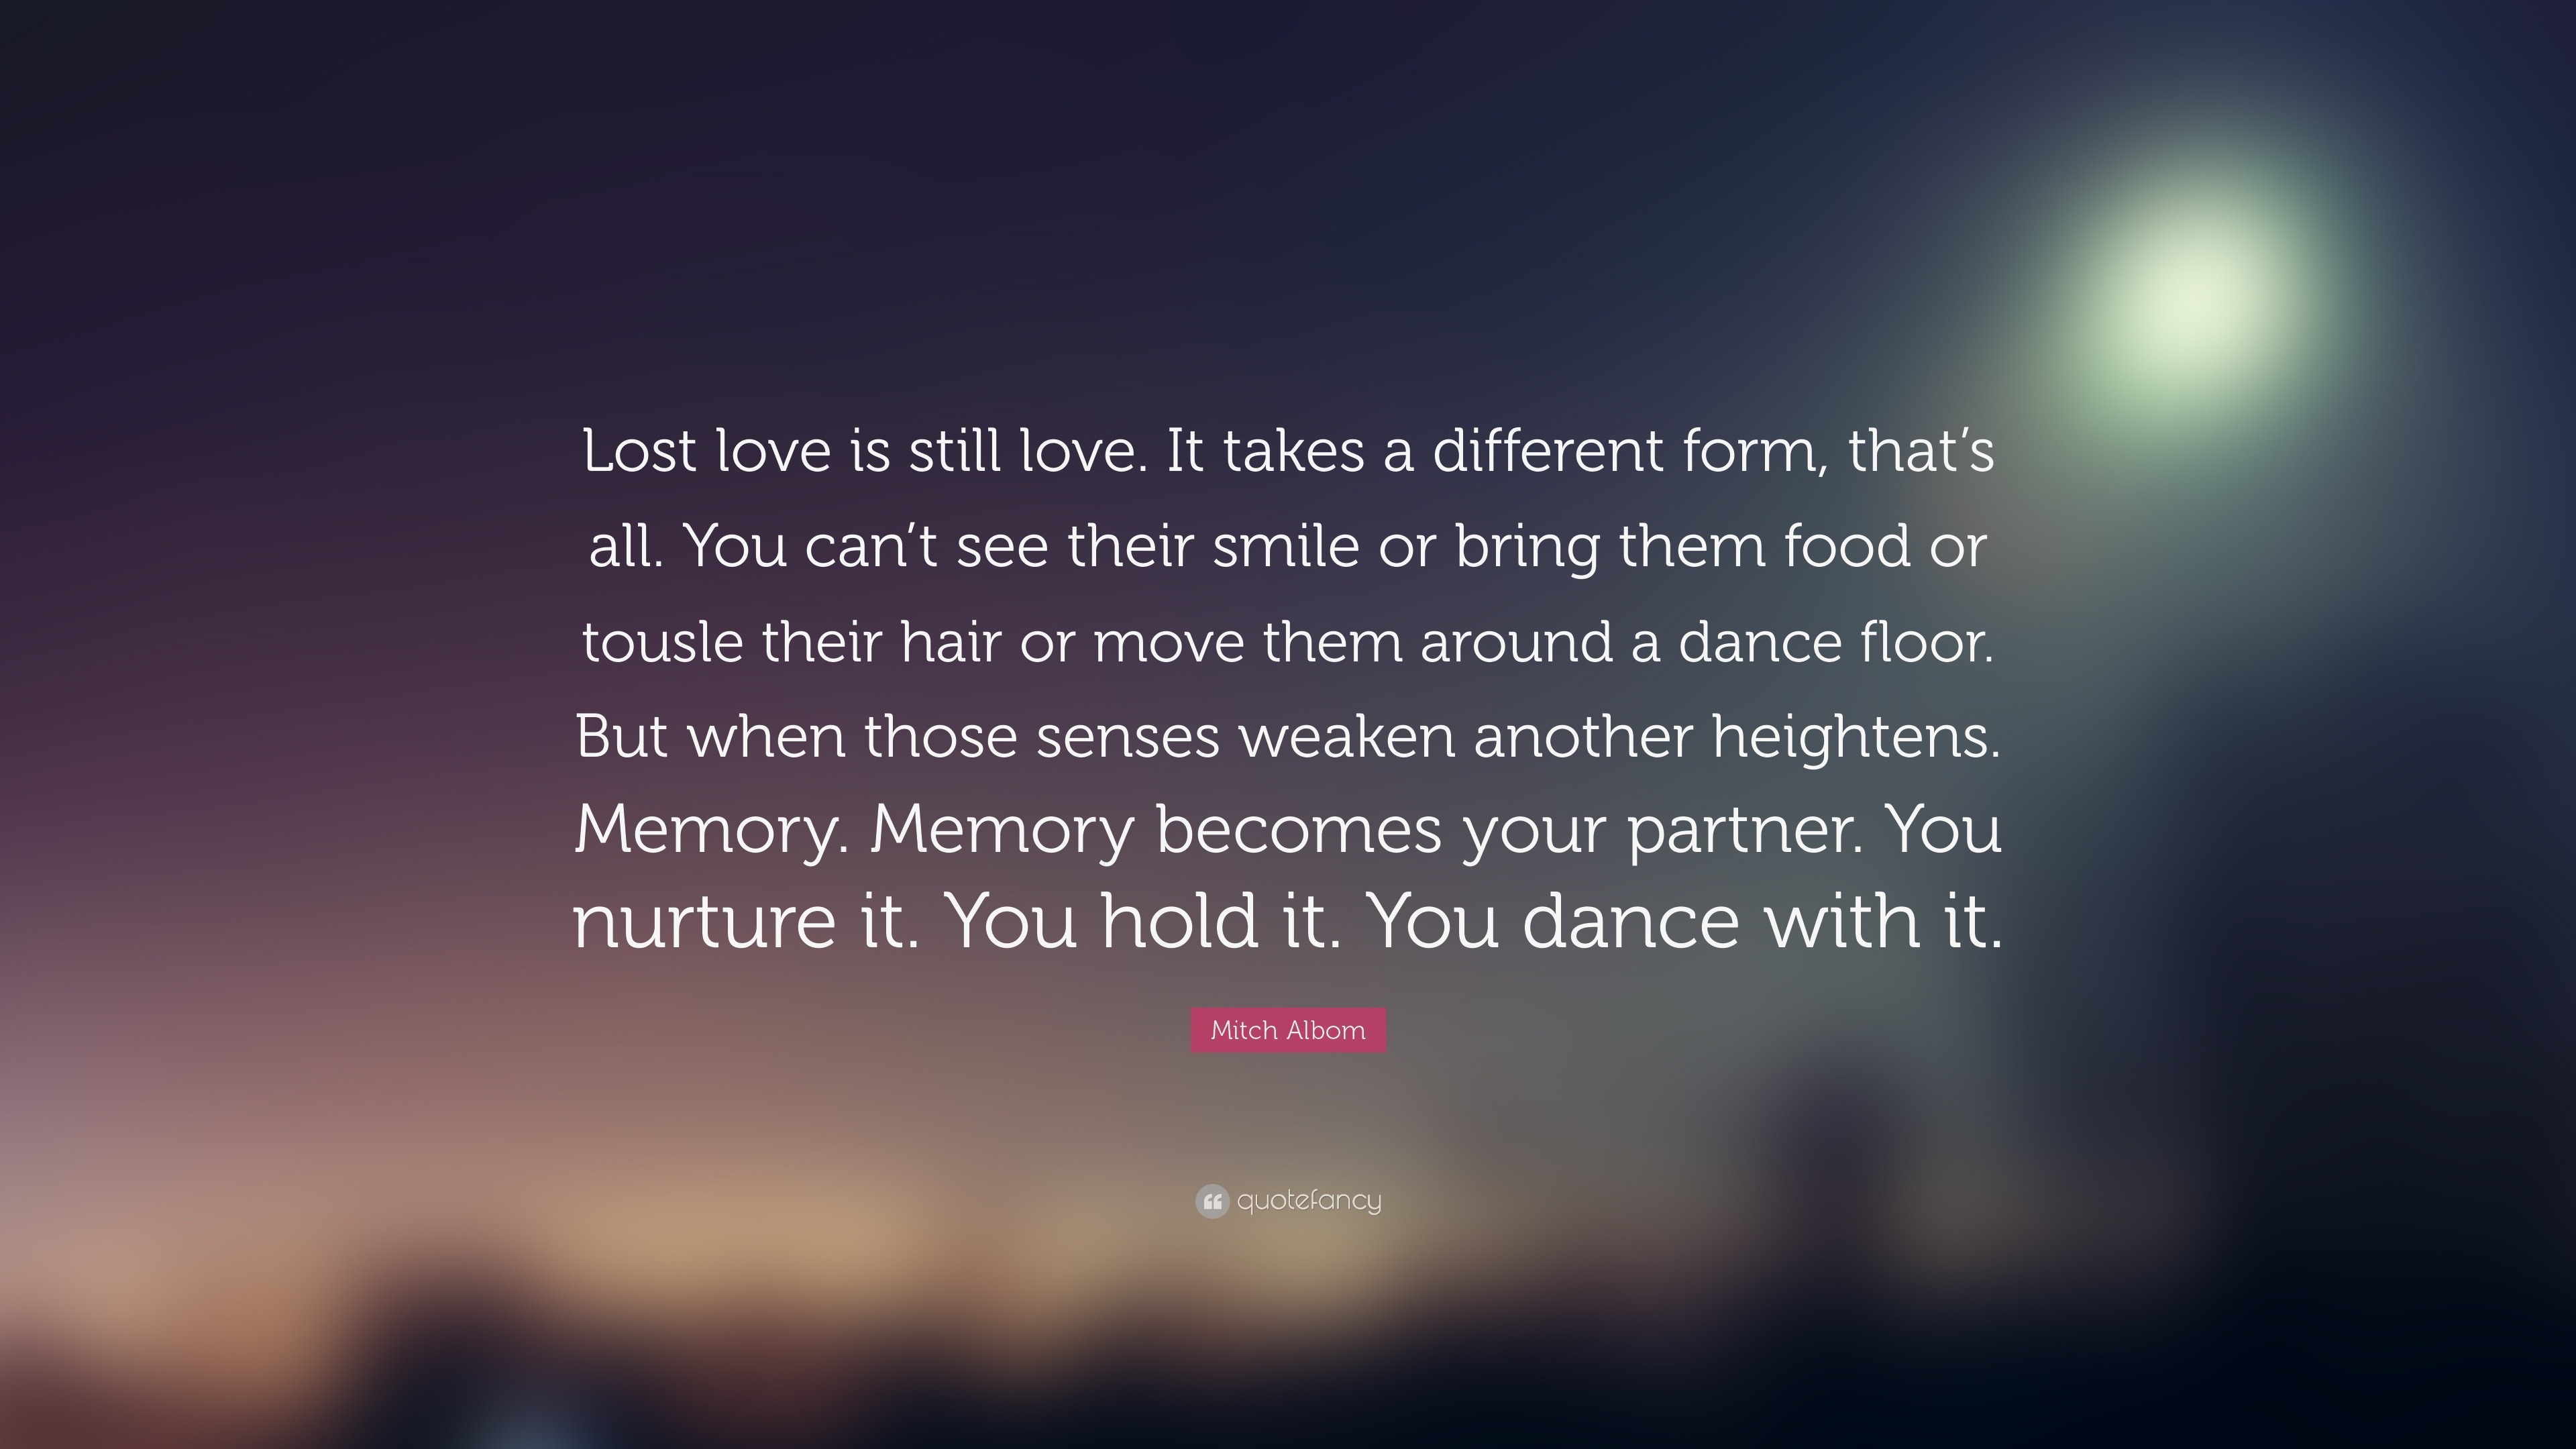 Mitch Albom Quote: “Lost love is still love. It takes a different form